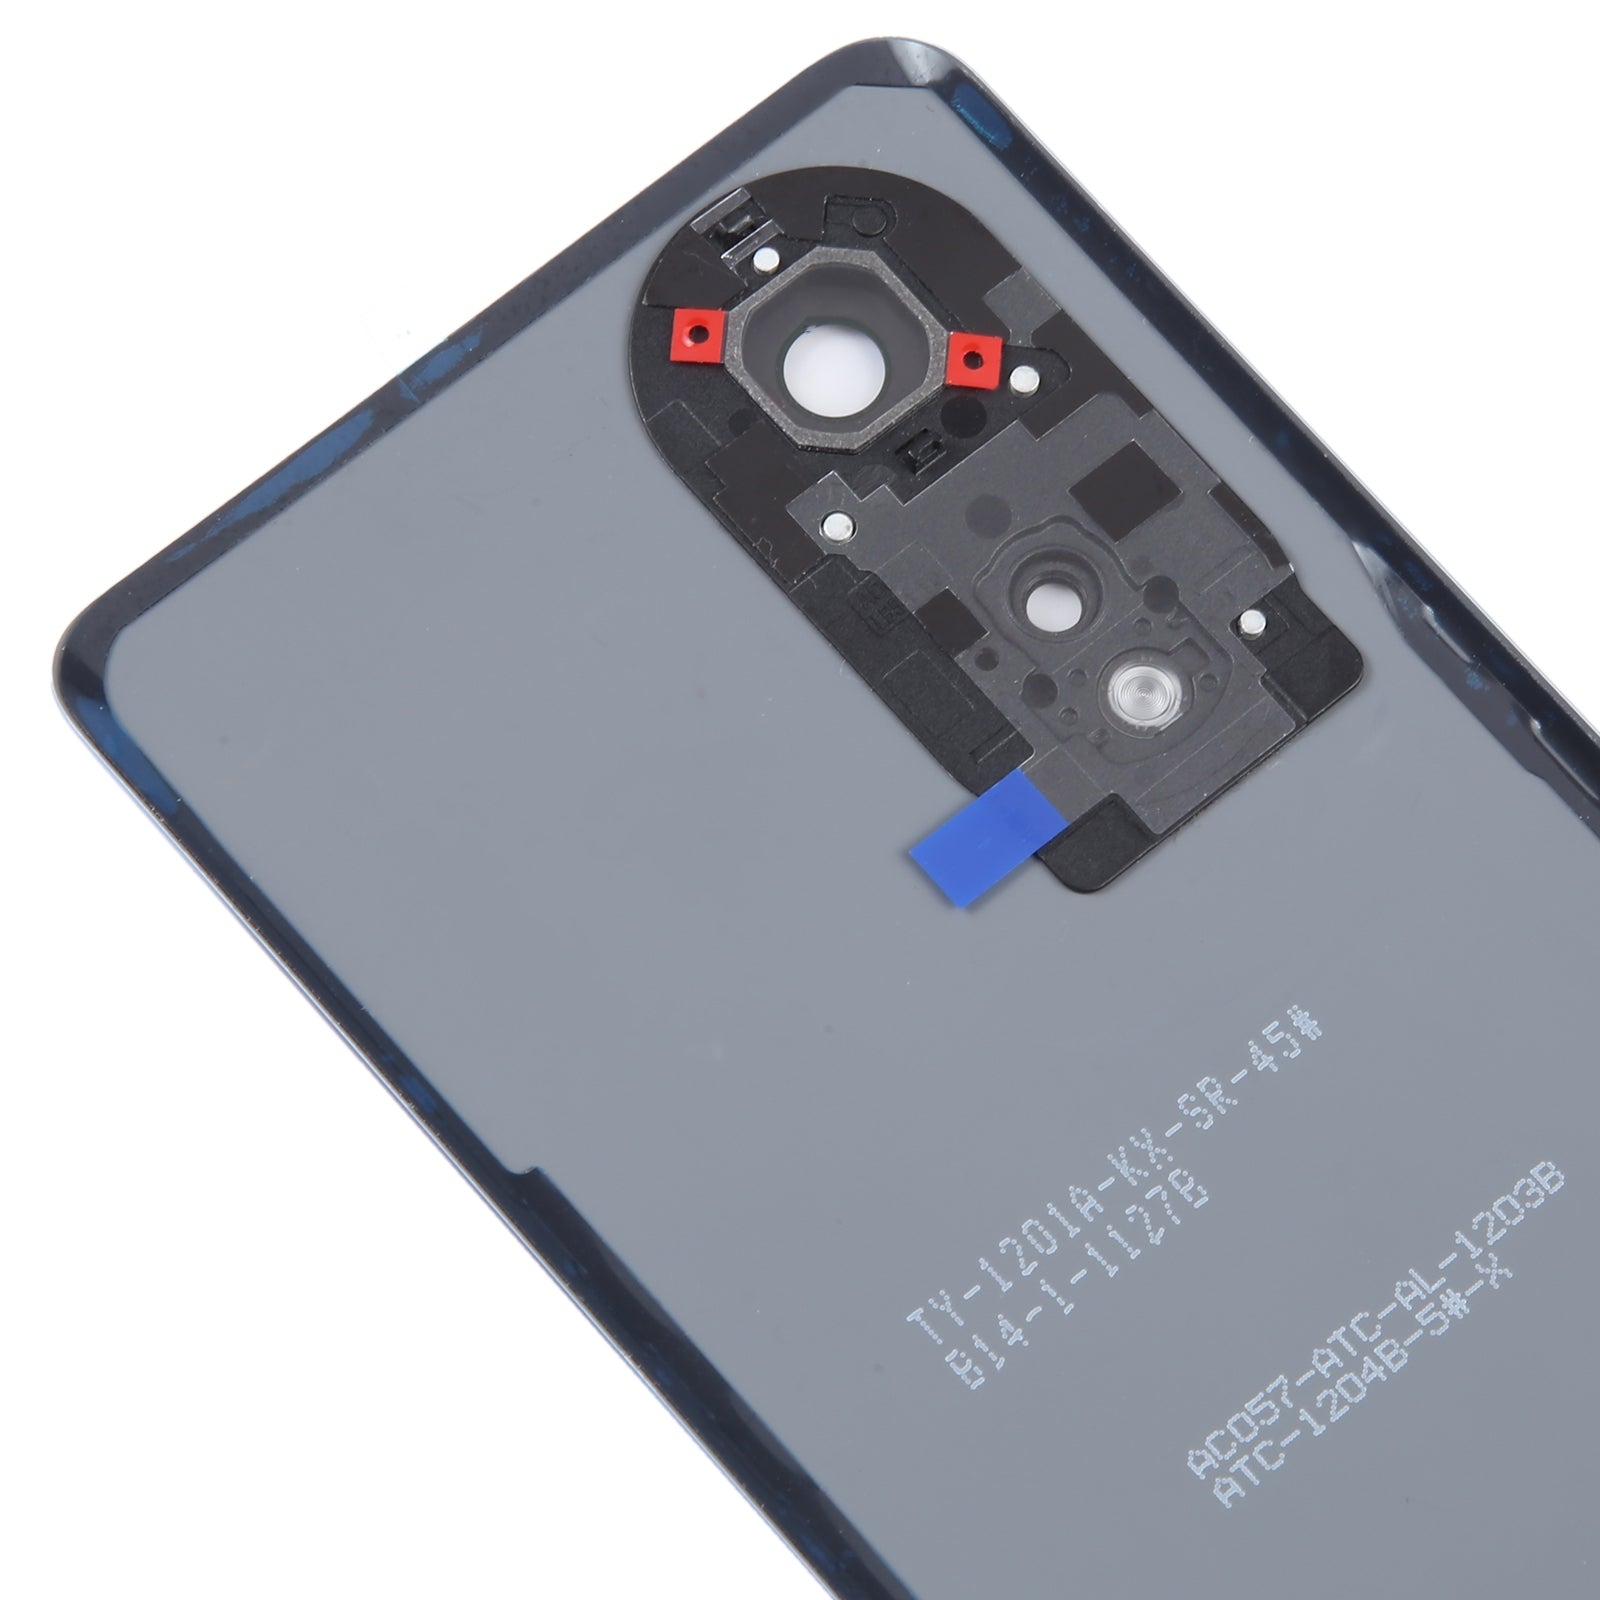 Battery Cover Back Cover Oppo A1 Pro Blue